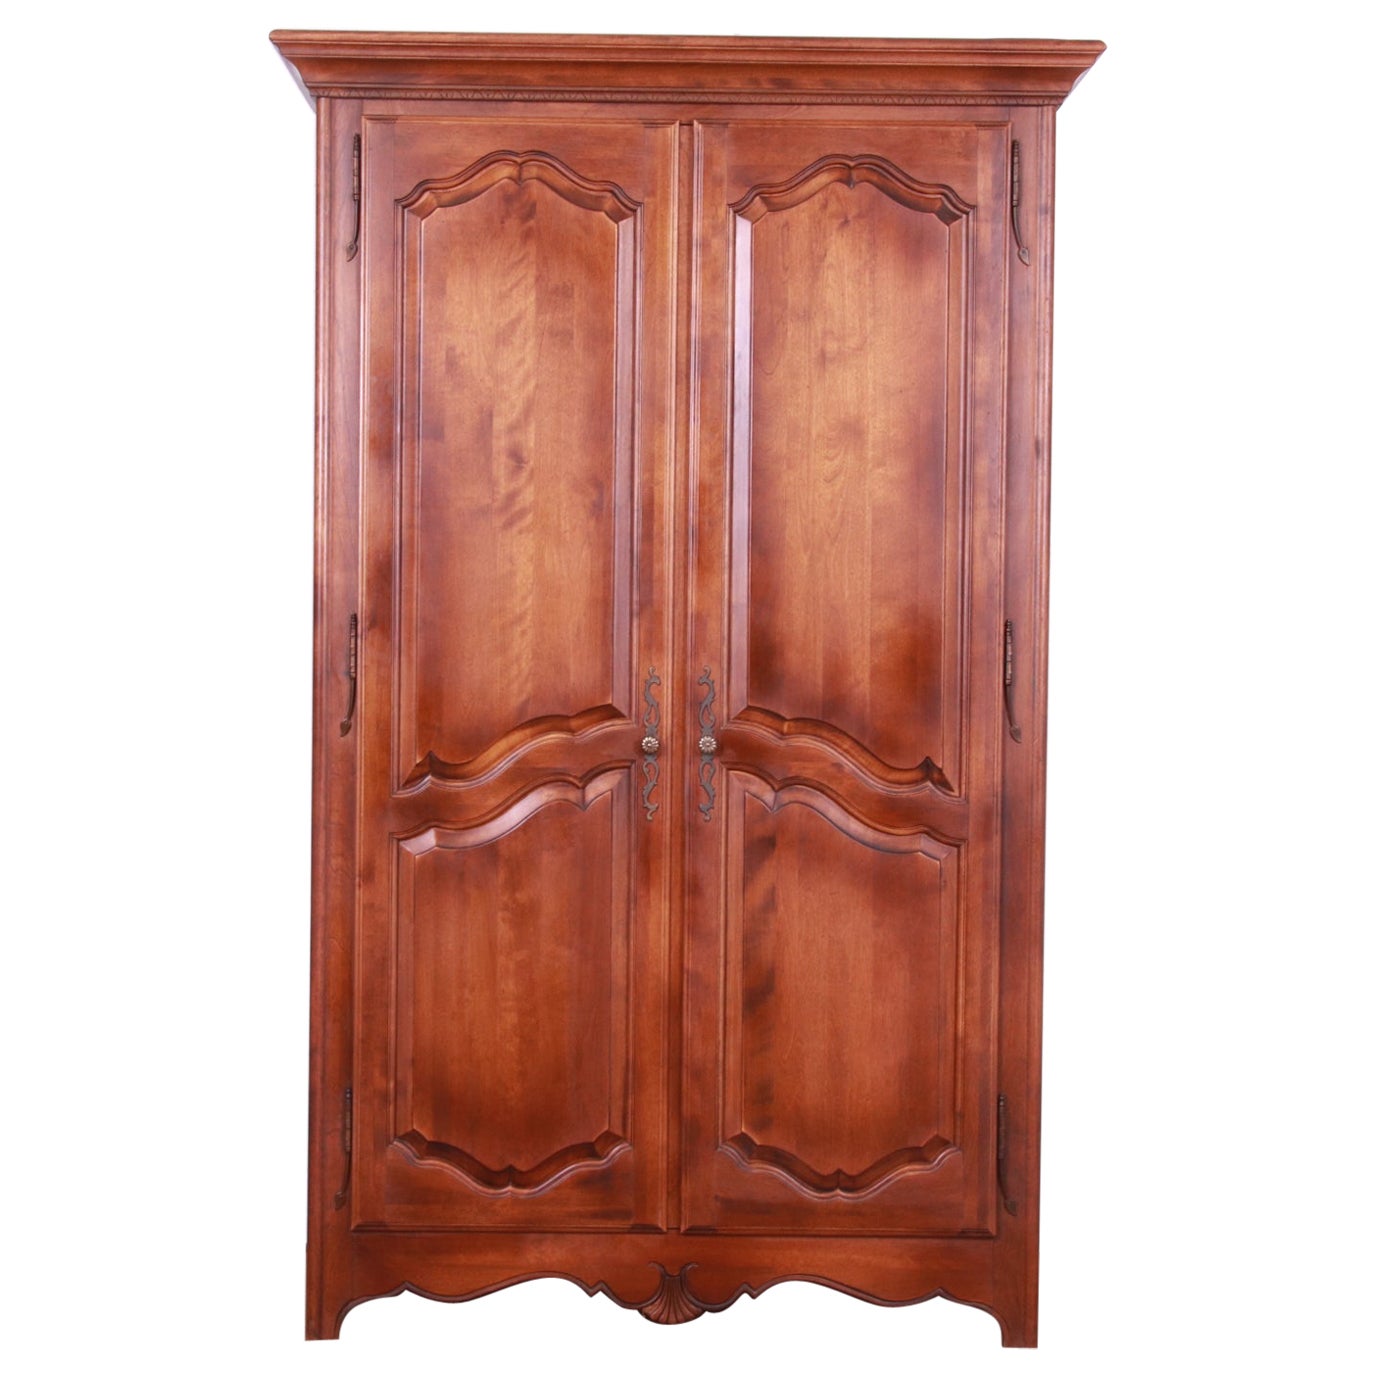 Ethan Allen Country French Carved Birch Wood Armoire Dresser